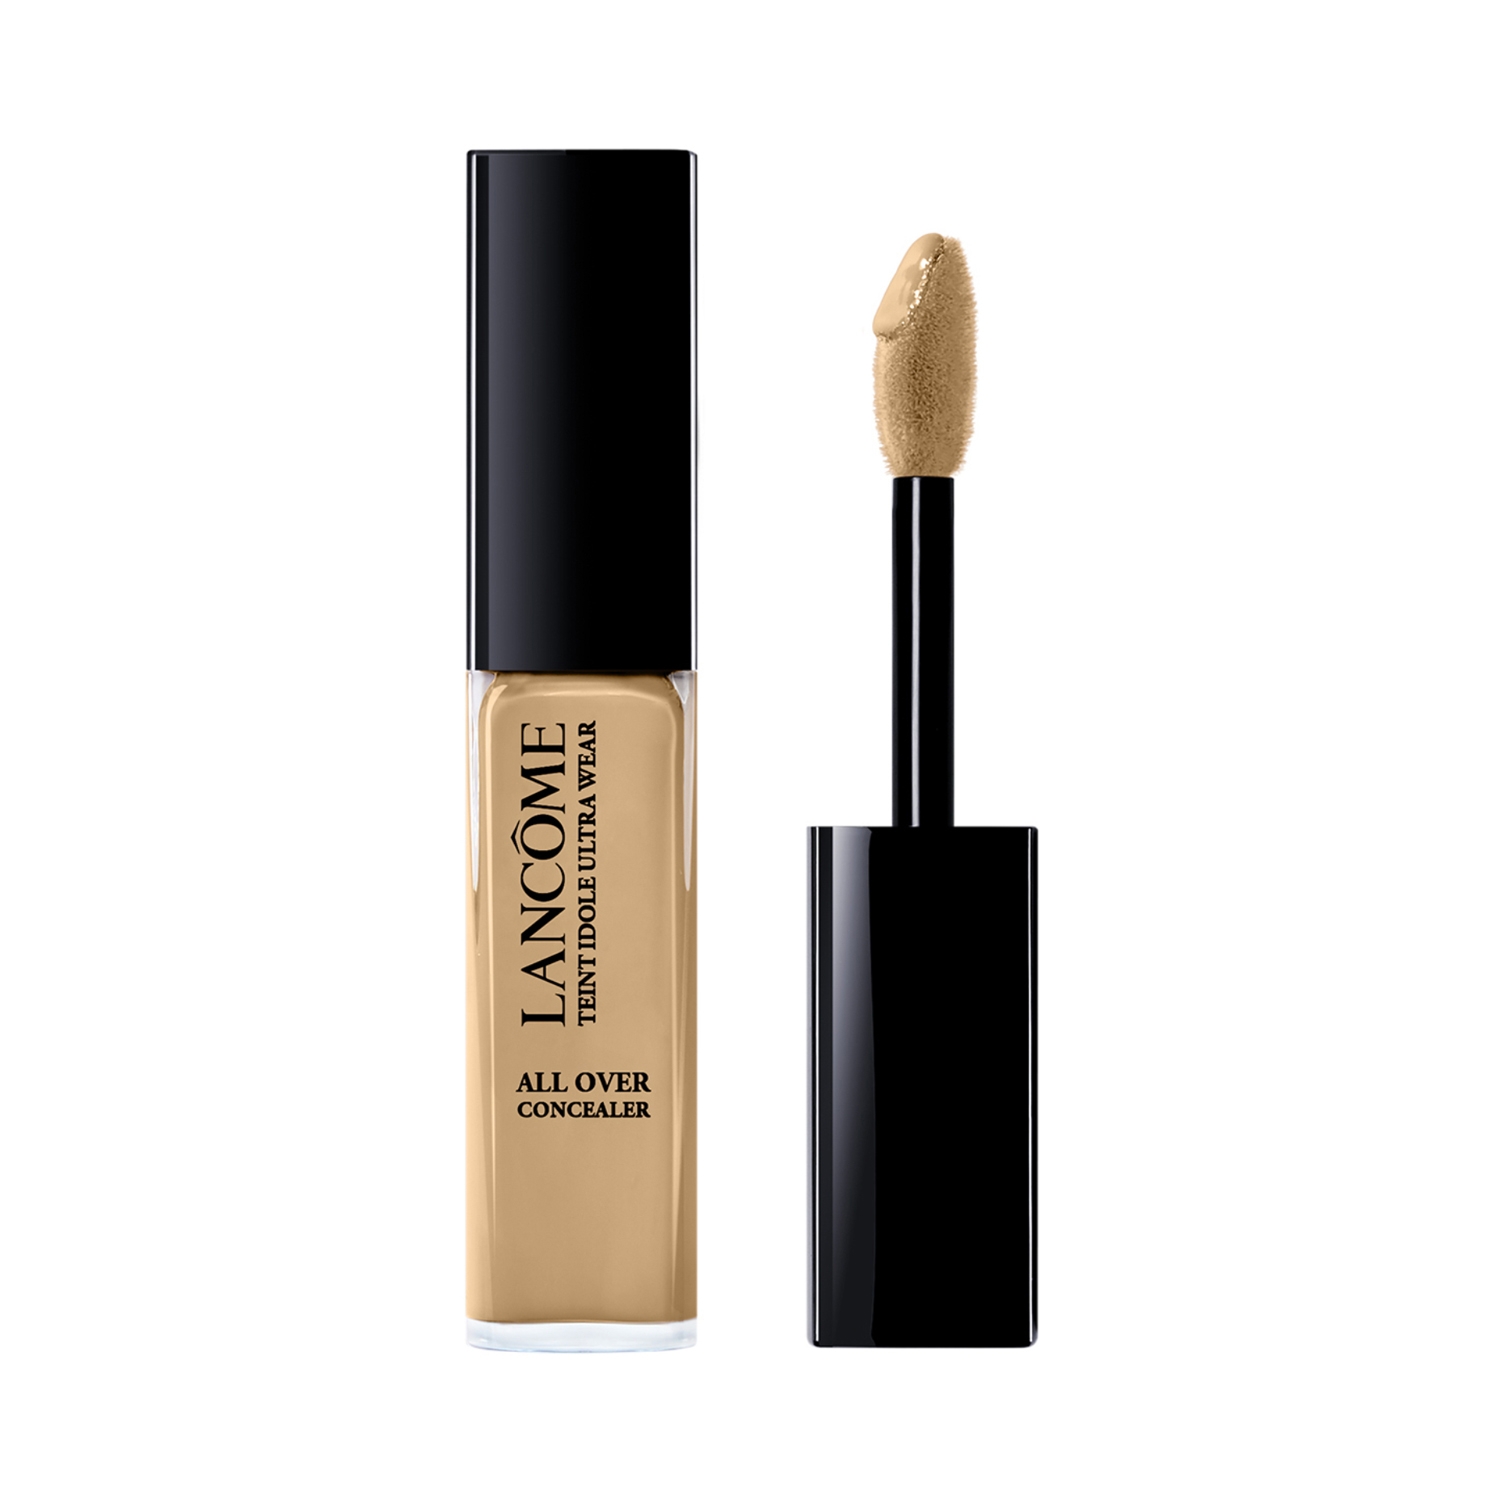 Lancome | Lancome Teint Idole Ultra Wear All Over Concealer - 360 Bisque Neutral (13ml)